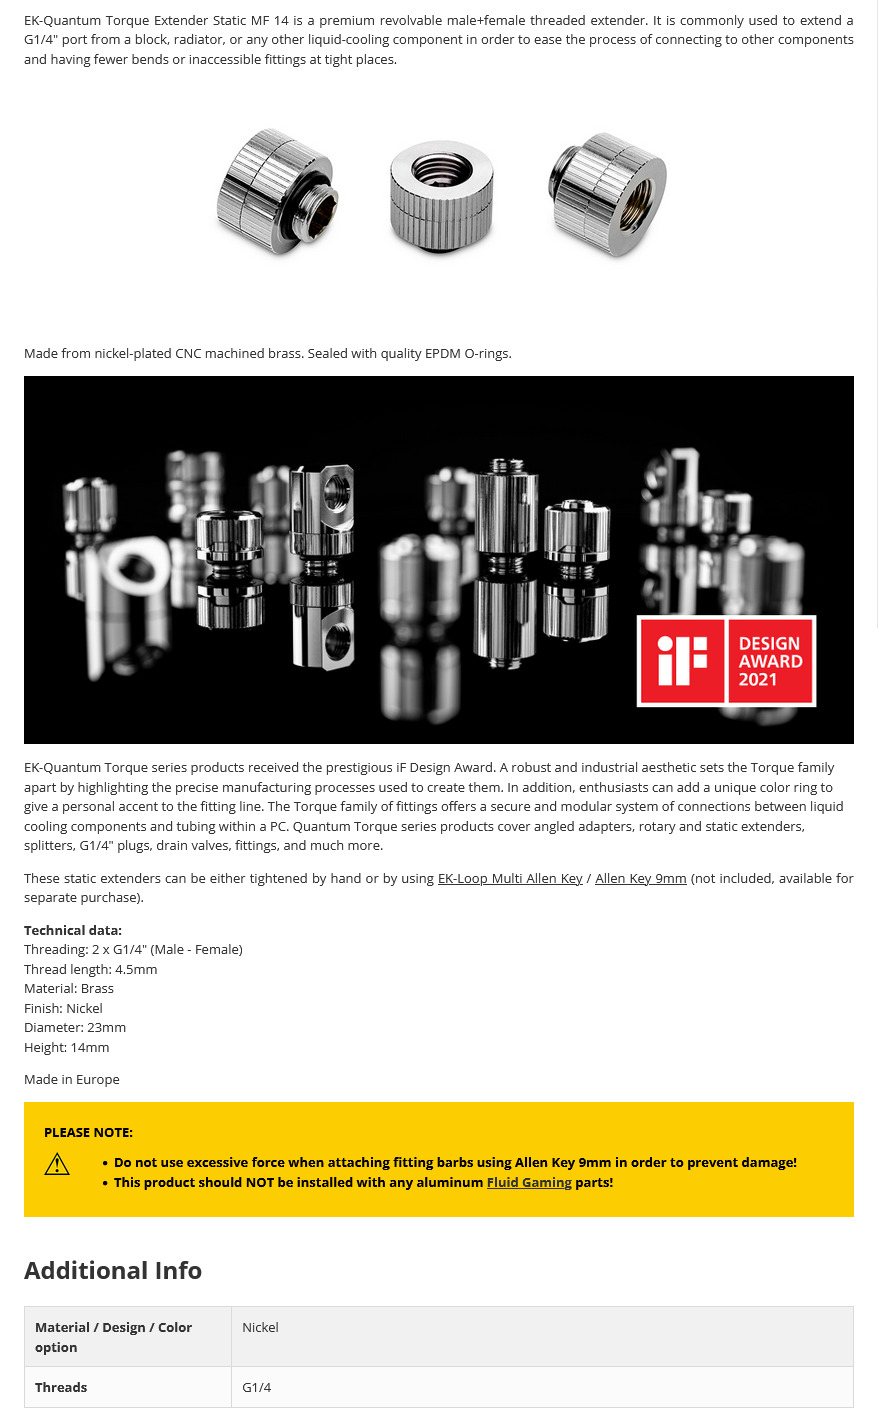 A large marketing image providing additional information about the product EK Quantum Torque Extender Rotary MF 14 - Nickel - Additional alt info not provided